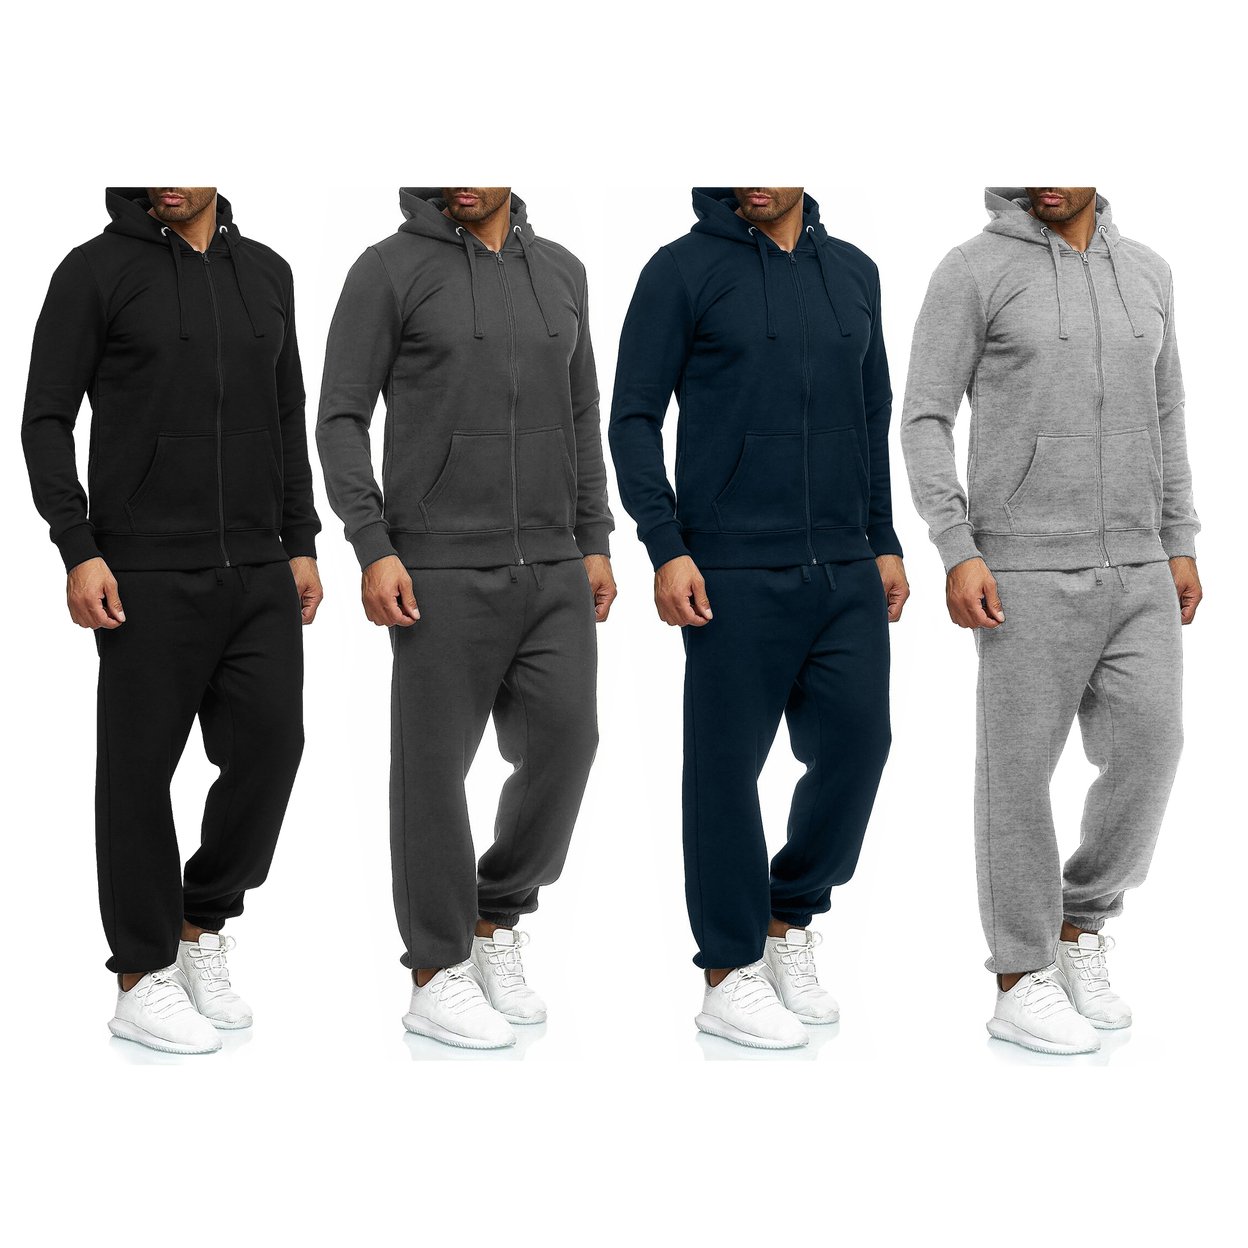 Multi-Pack: Men's Casual Big & Tall Athletic Active Winter Warm Fleece Lined Full Zip Tracksuit Jogger Set - Navy, 1-pack, X-large